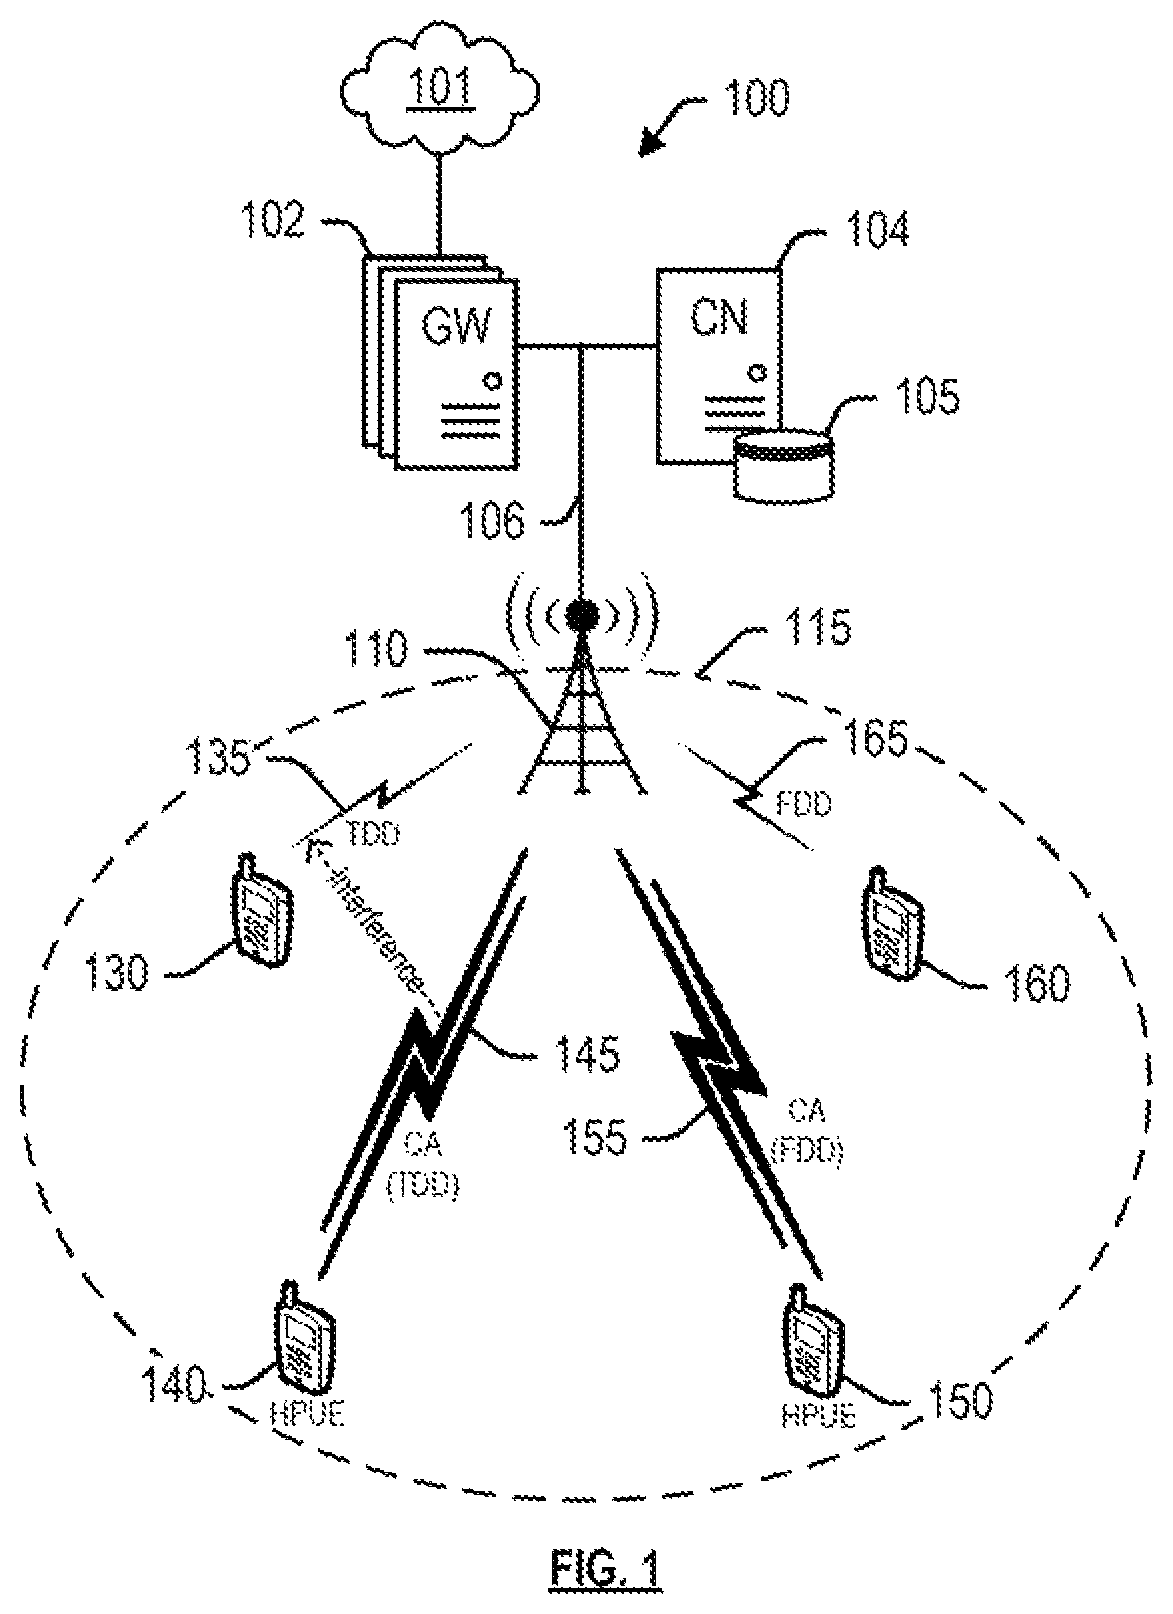 Selecting a primary carrier for a high power class wireless device